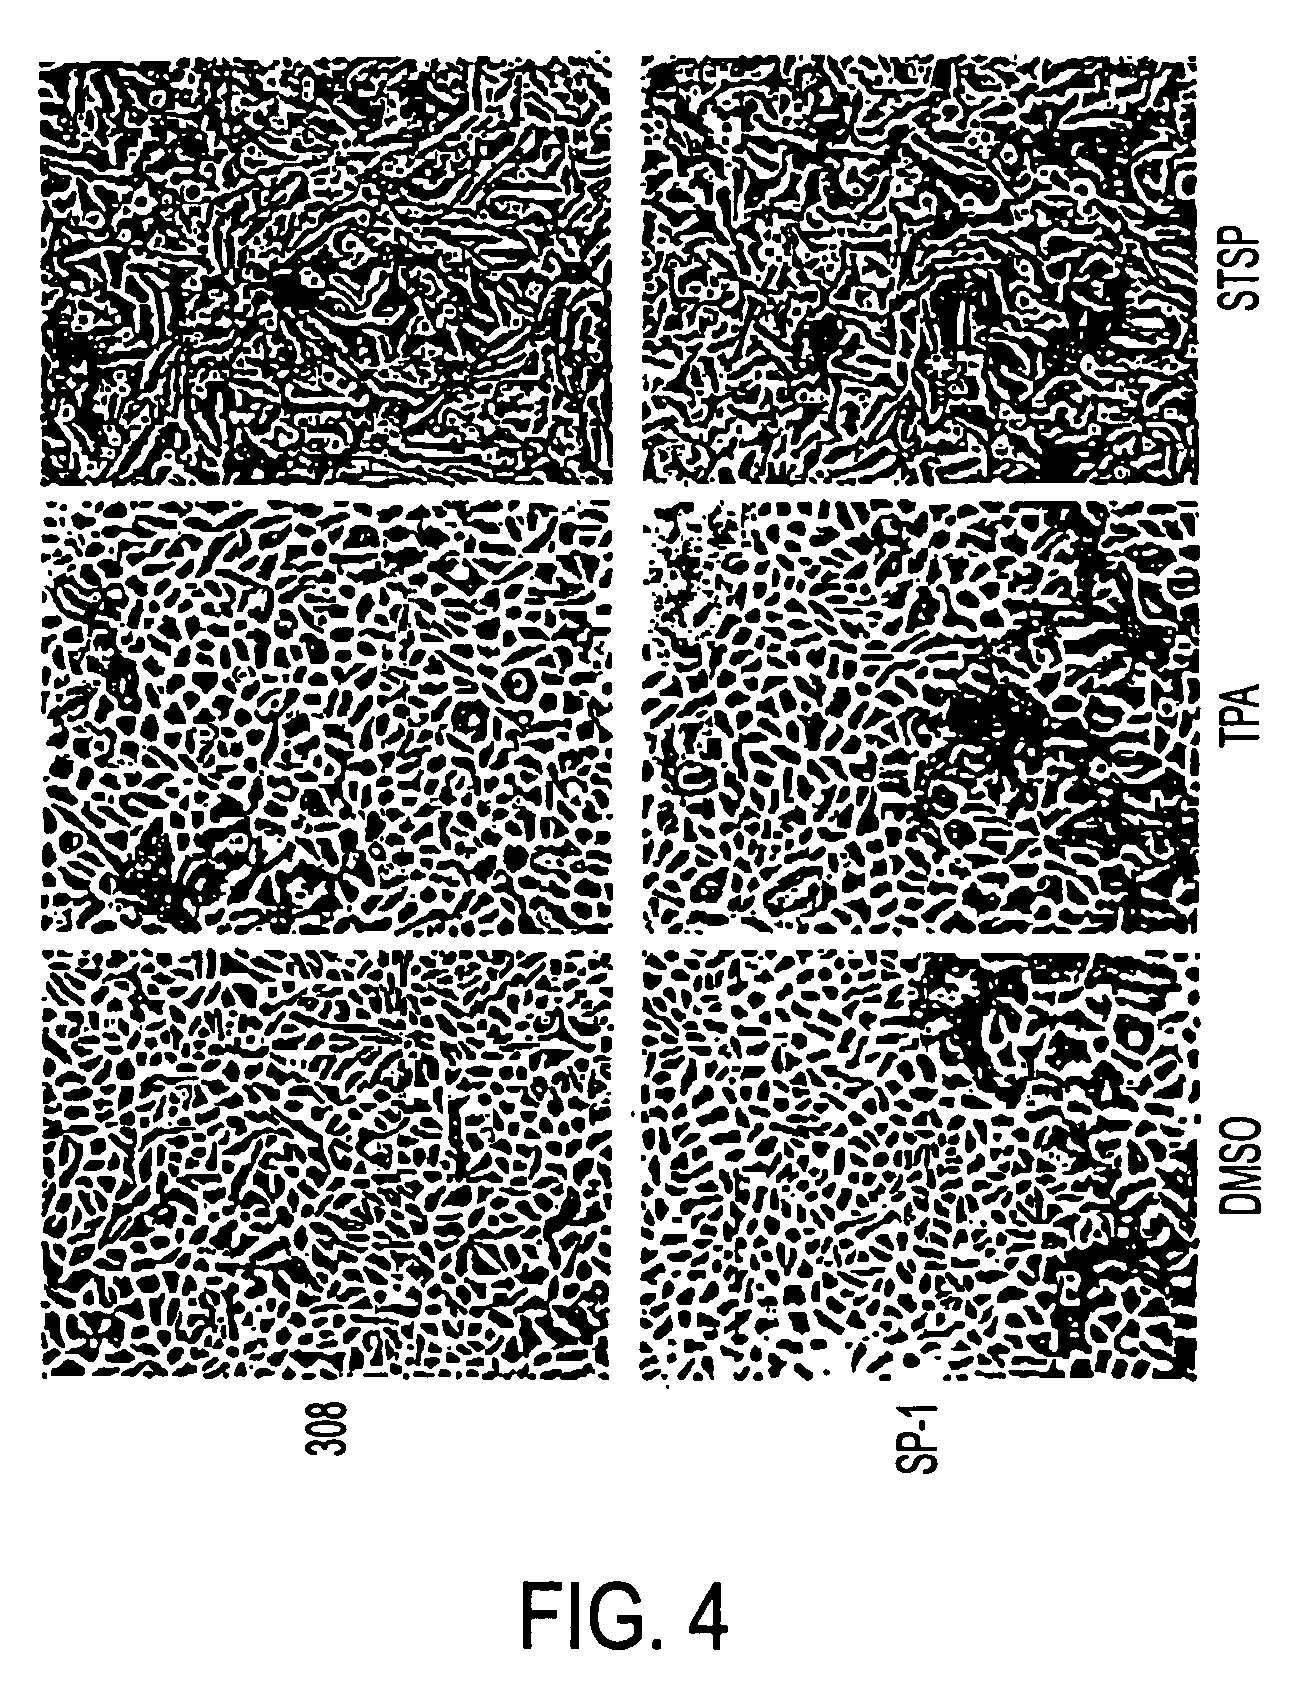 Pharmaceutical compositions and methods for preventing skin tumor formation and causing regression of existing tumors